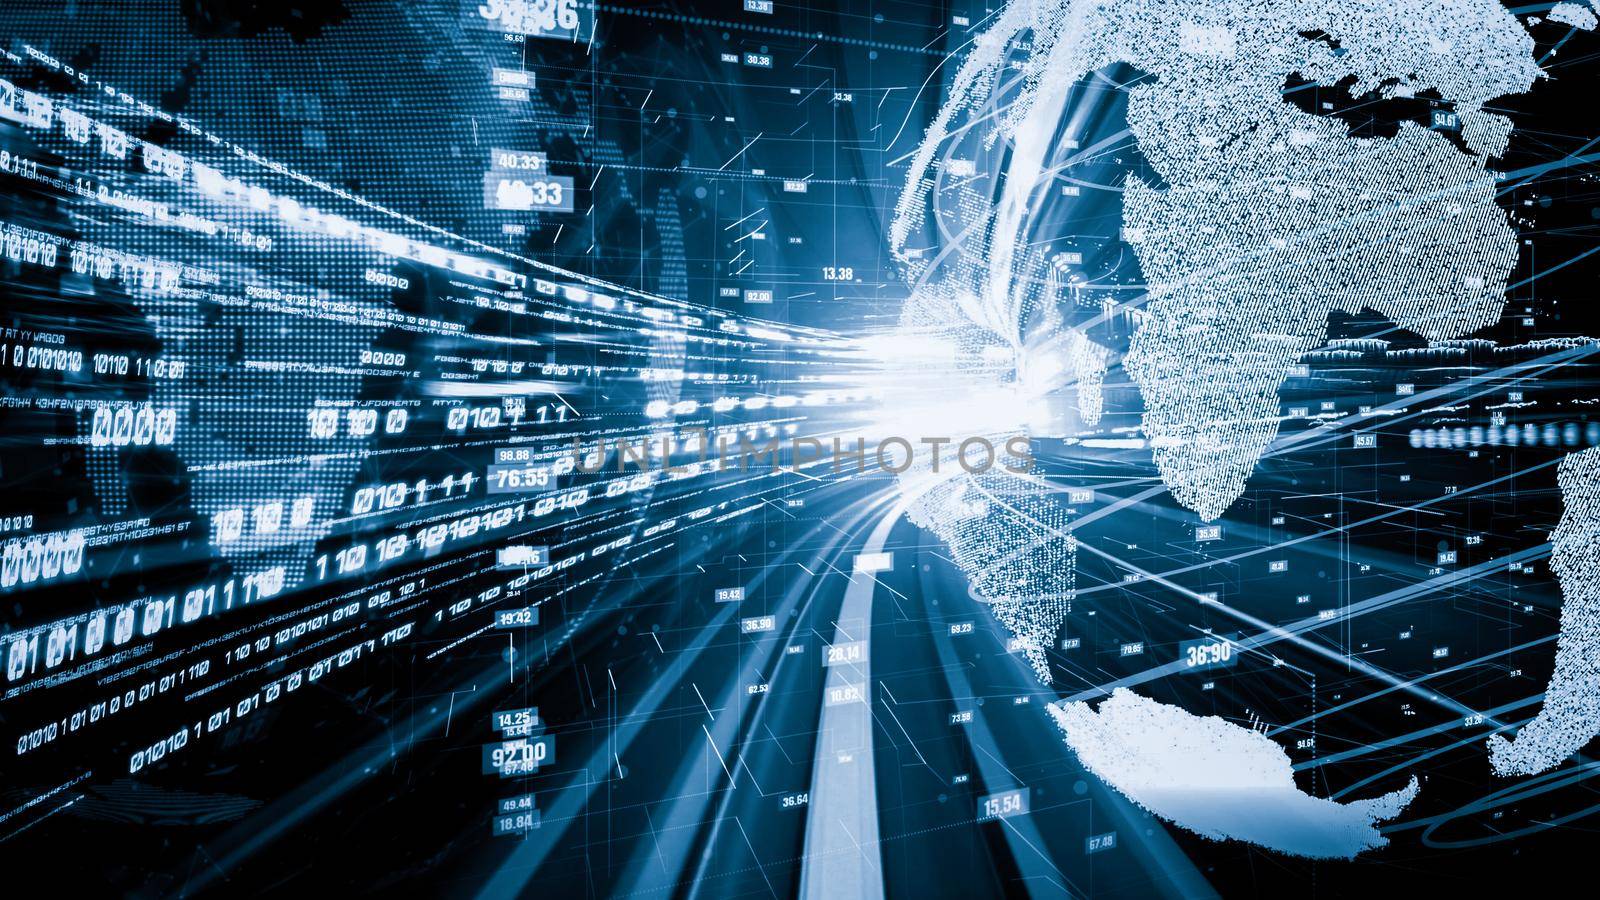 Futuristic global network and tacit digital data transfer 3D graphic . Concept of smart digital transformation and technology disruption that changes global trends in new information era .